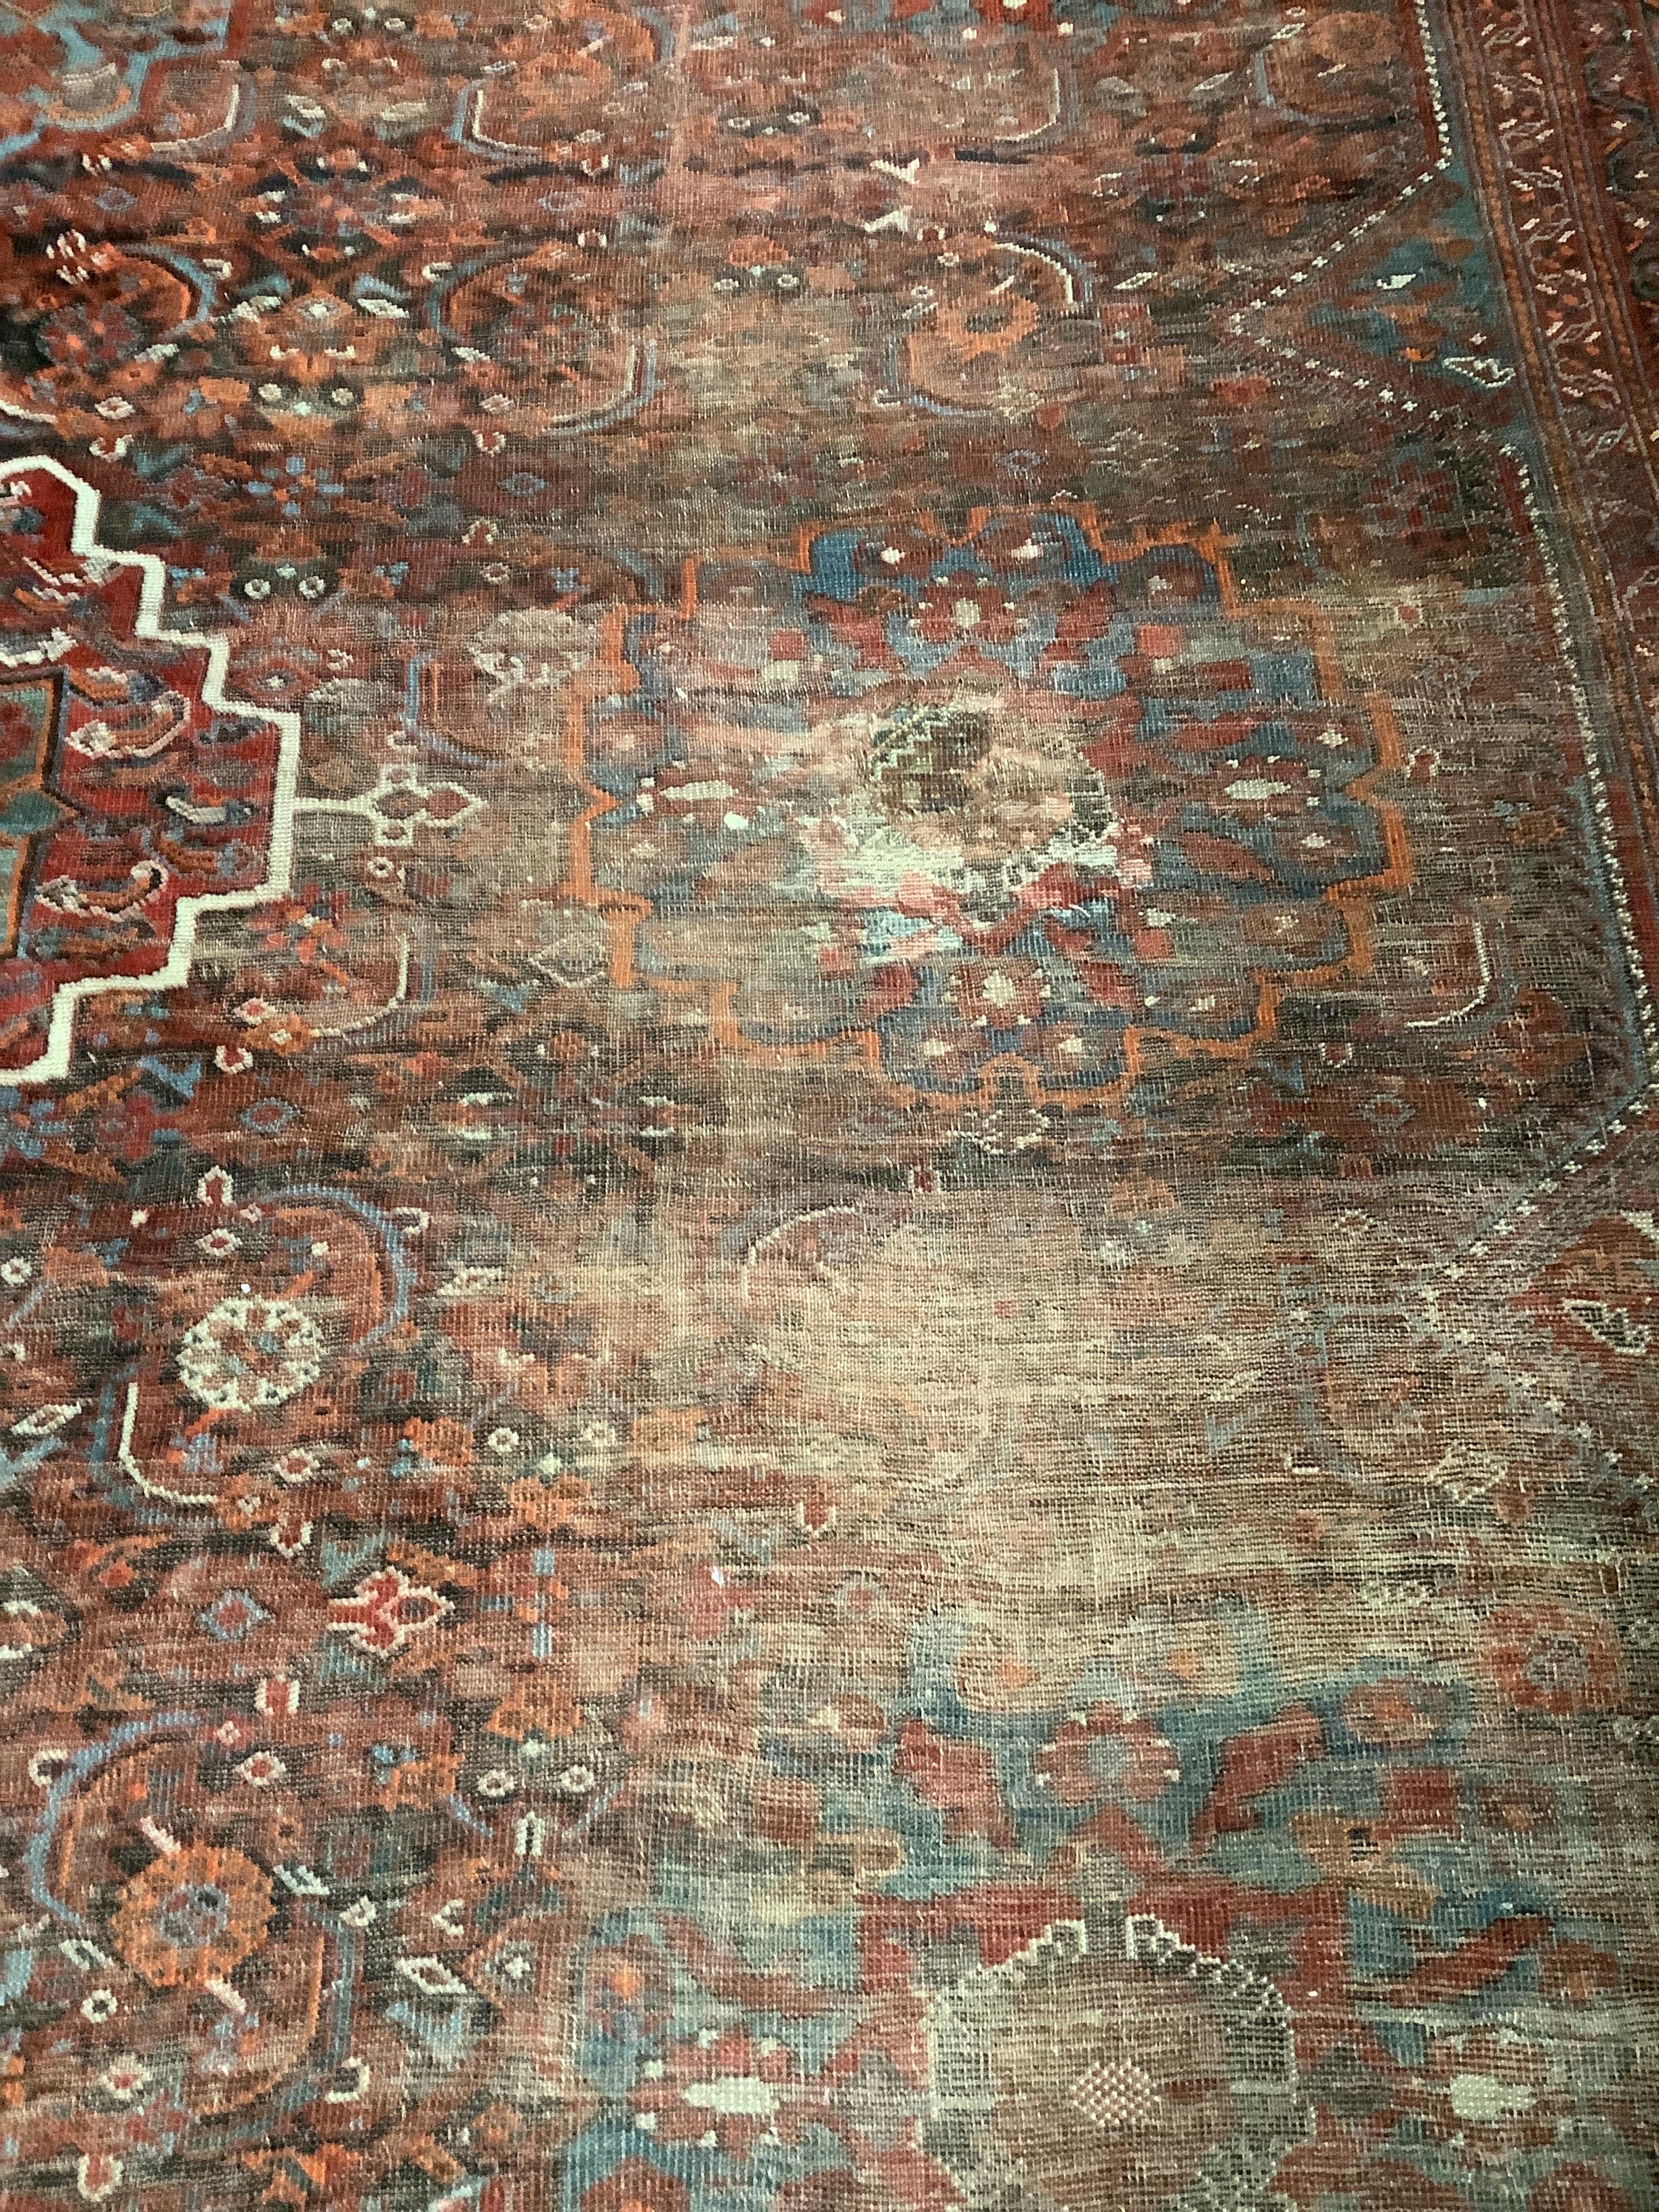 An early 20th century North West Persian red ground carpet, 410 x 348cm, worn and patch repaired.